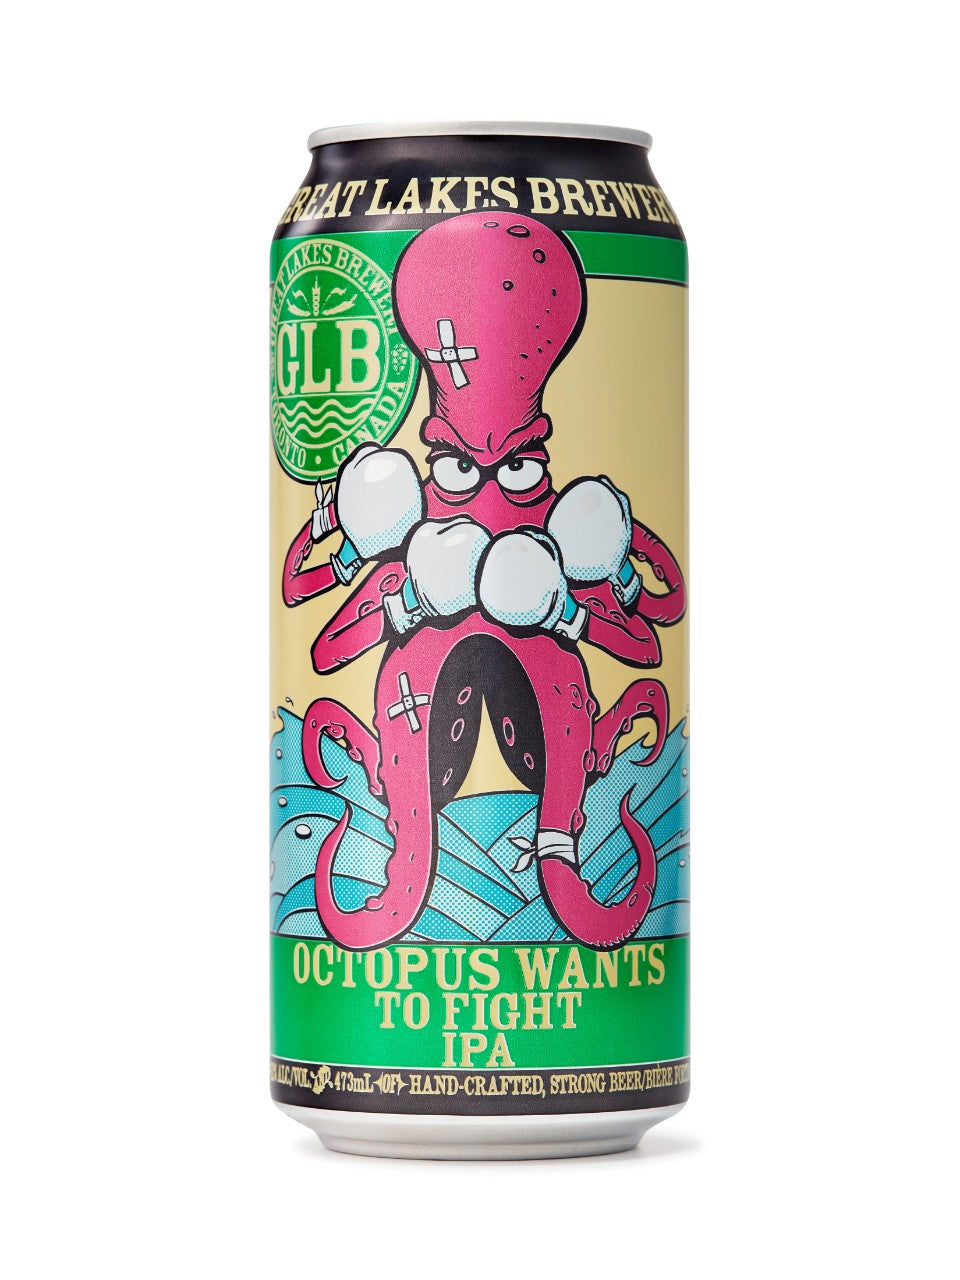 Great Lakes Brewery Octopus Wants To Fight IPA 473 mL can